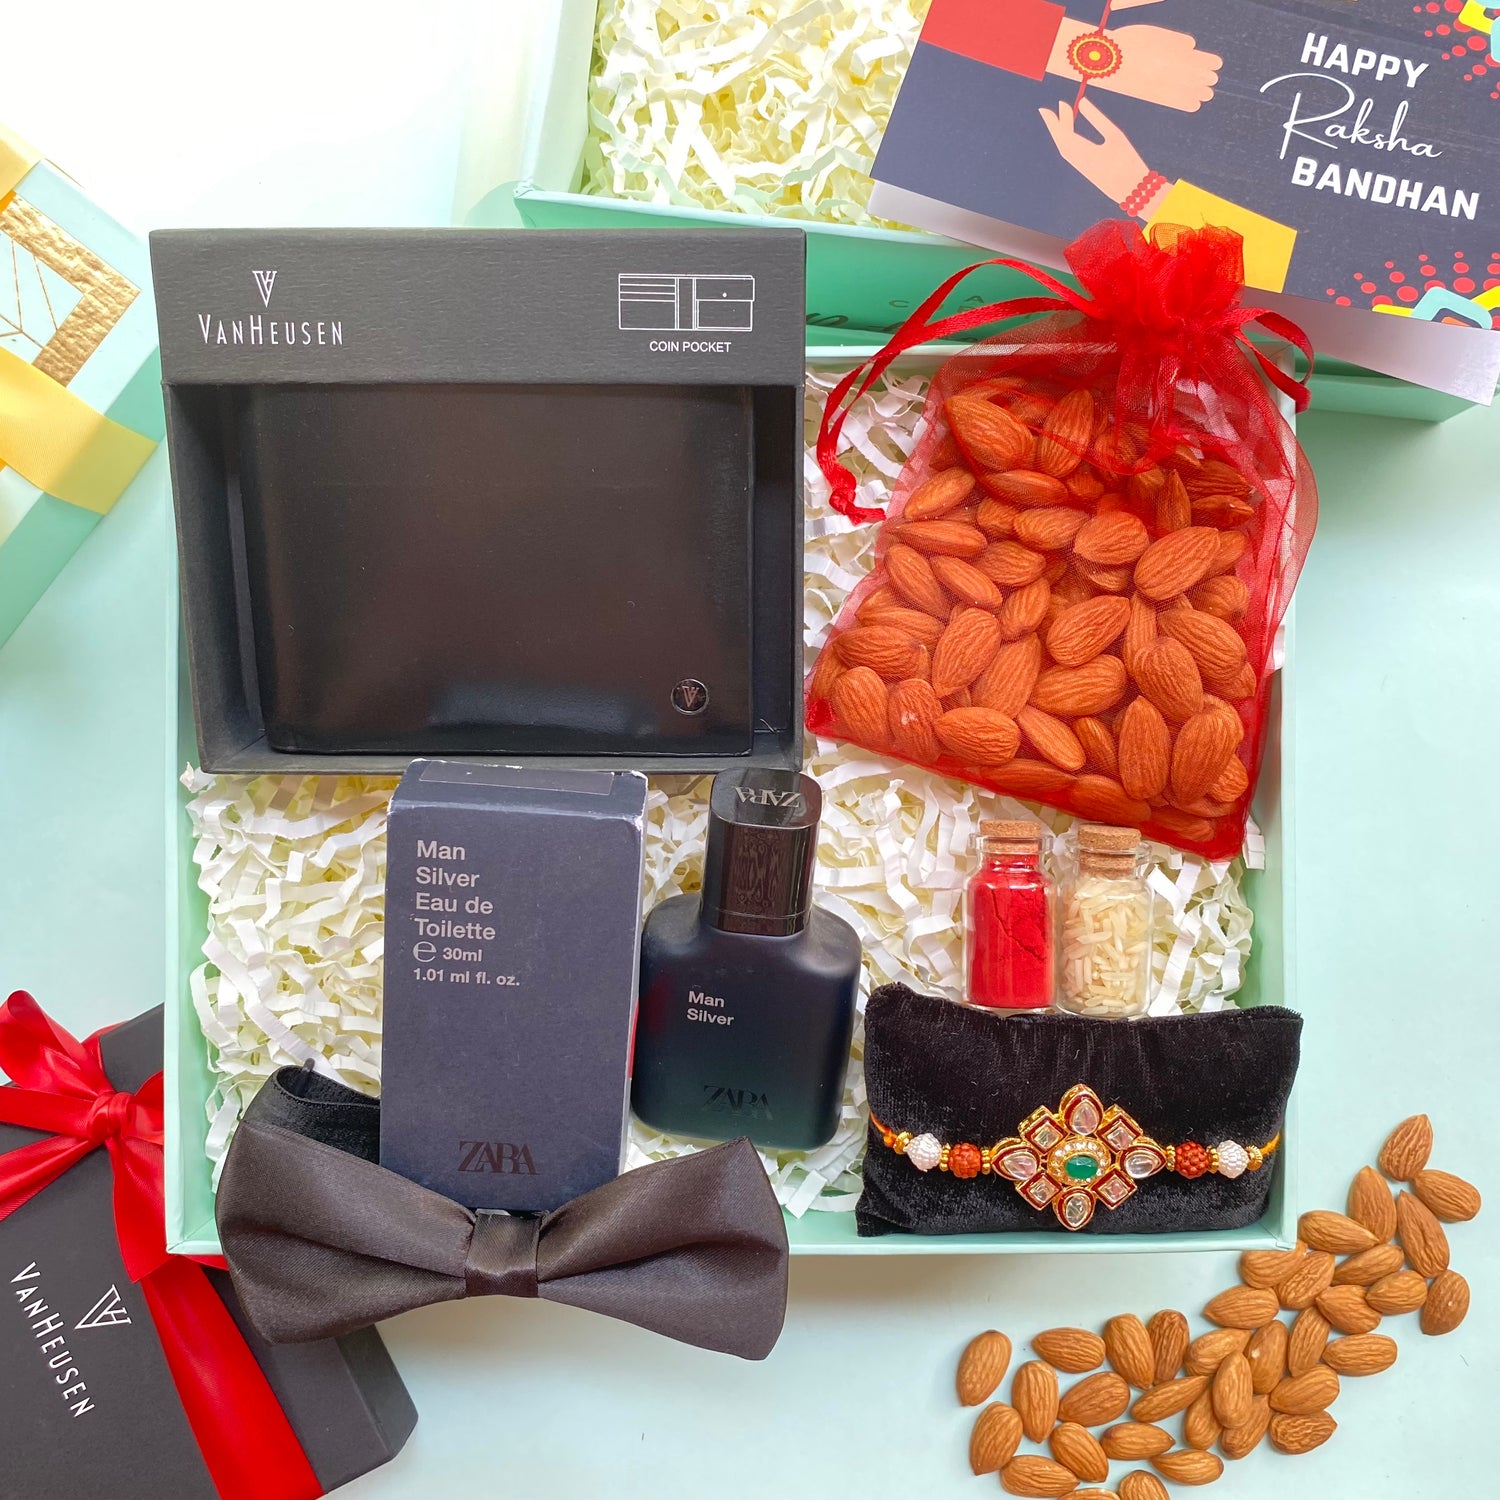 Rakhi hamper, Rakhi gift hamper. Rakhi Gift Ideas for Brothers